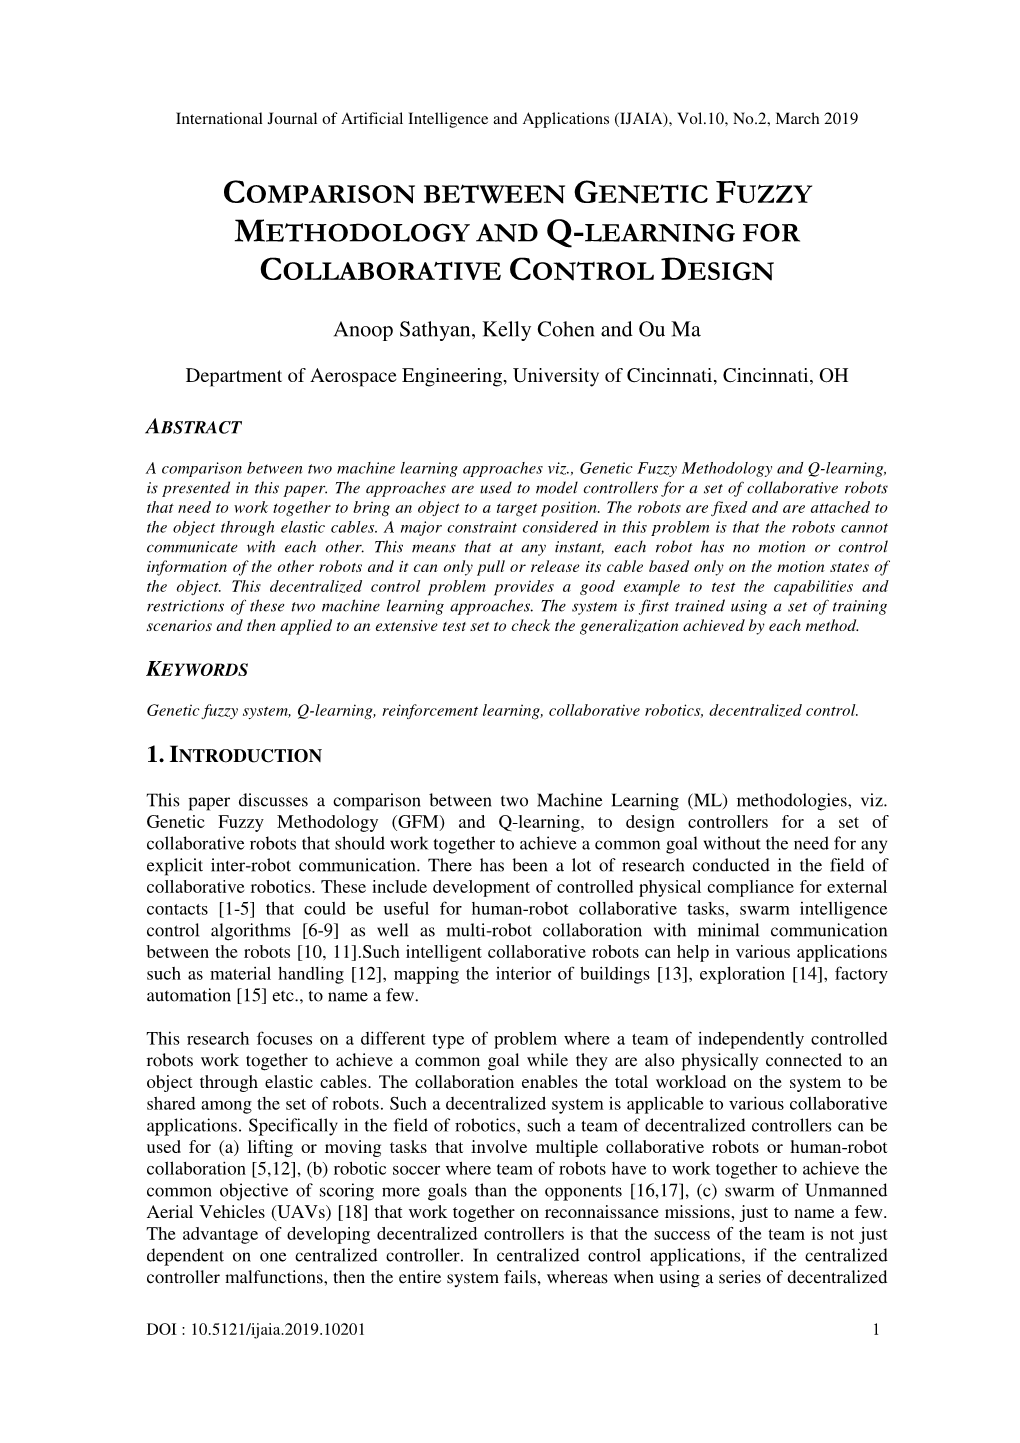 Comparison Between Genetic Fuzzy Methodology and Q-Learning for Collaborative Control Design